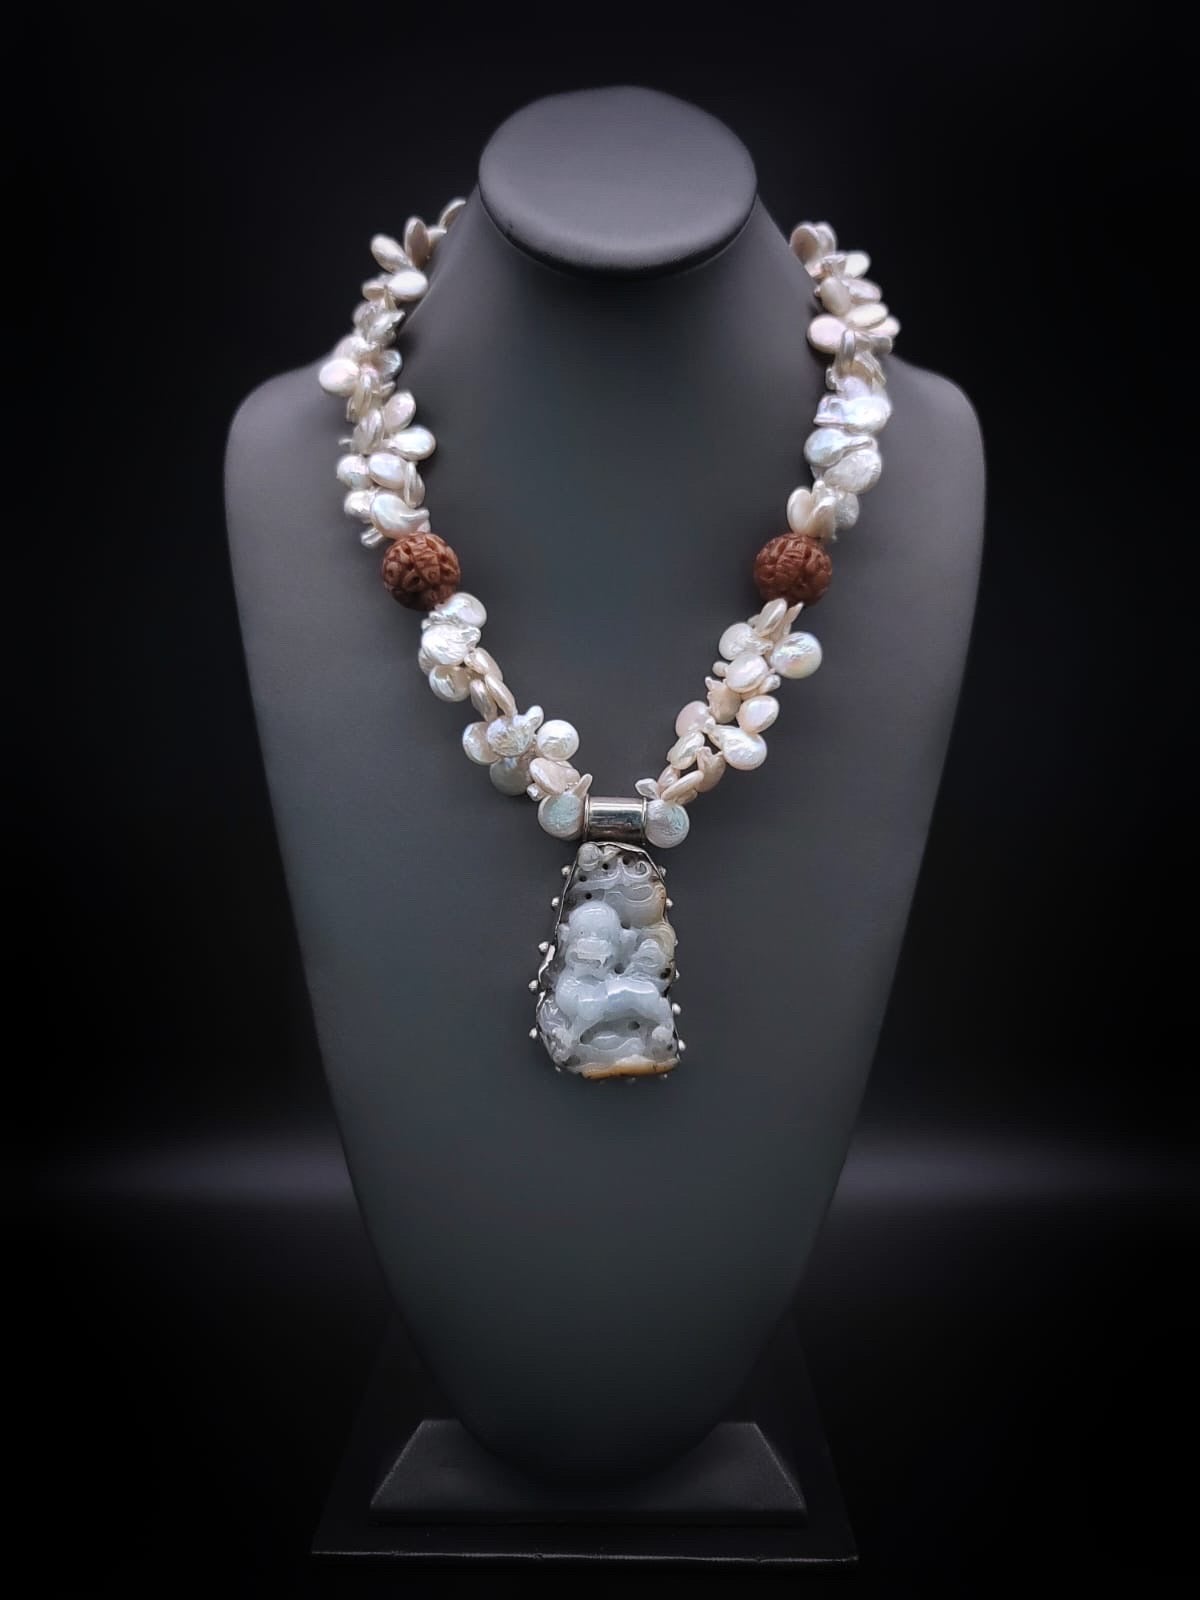 A.Jeschel Pearl necklace with a statement jade pendant.